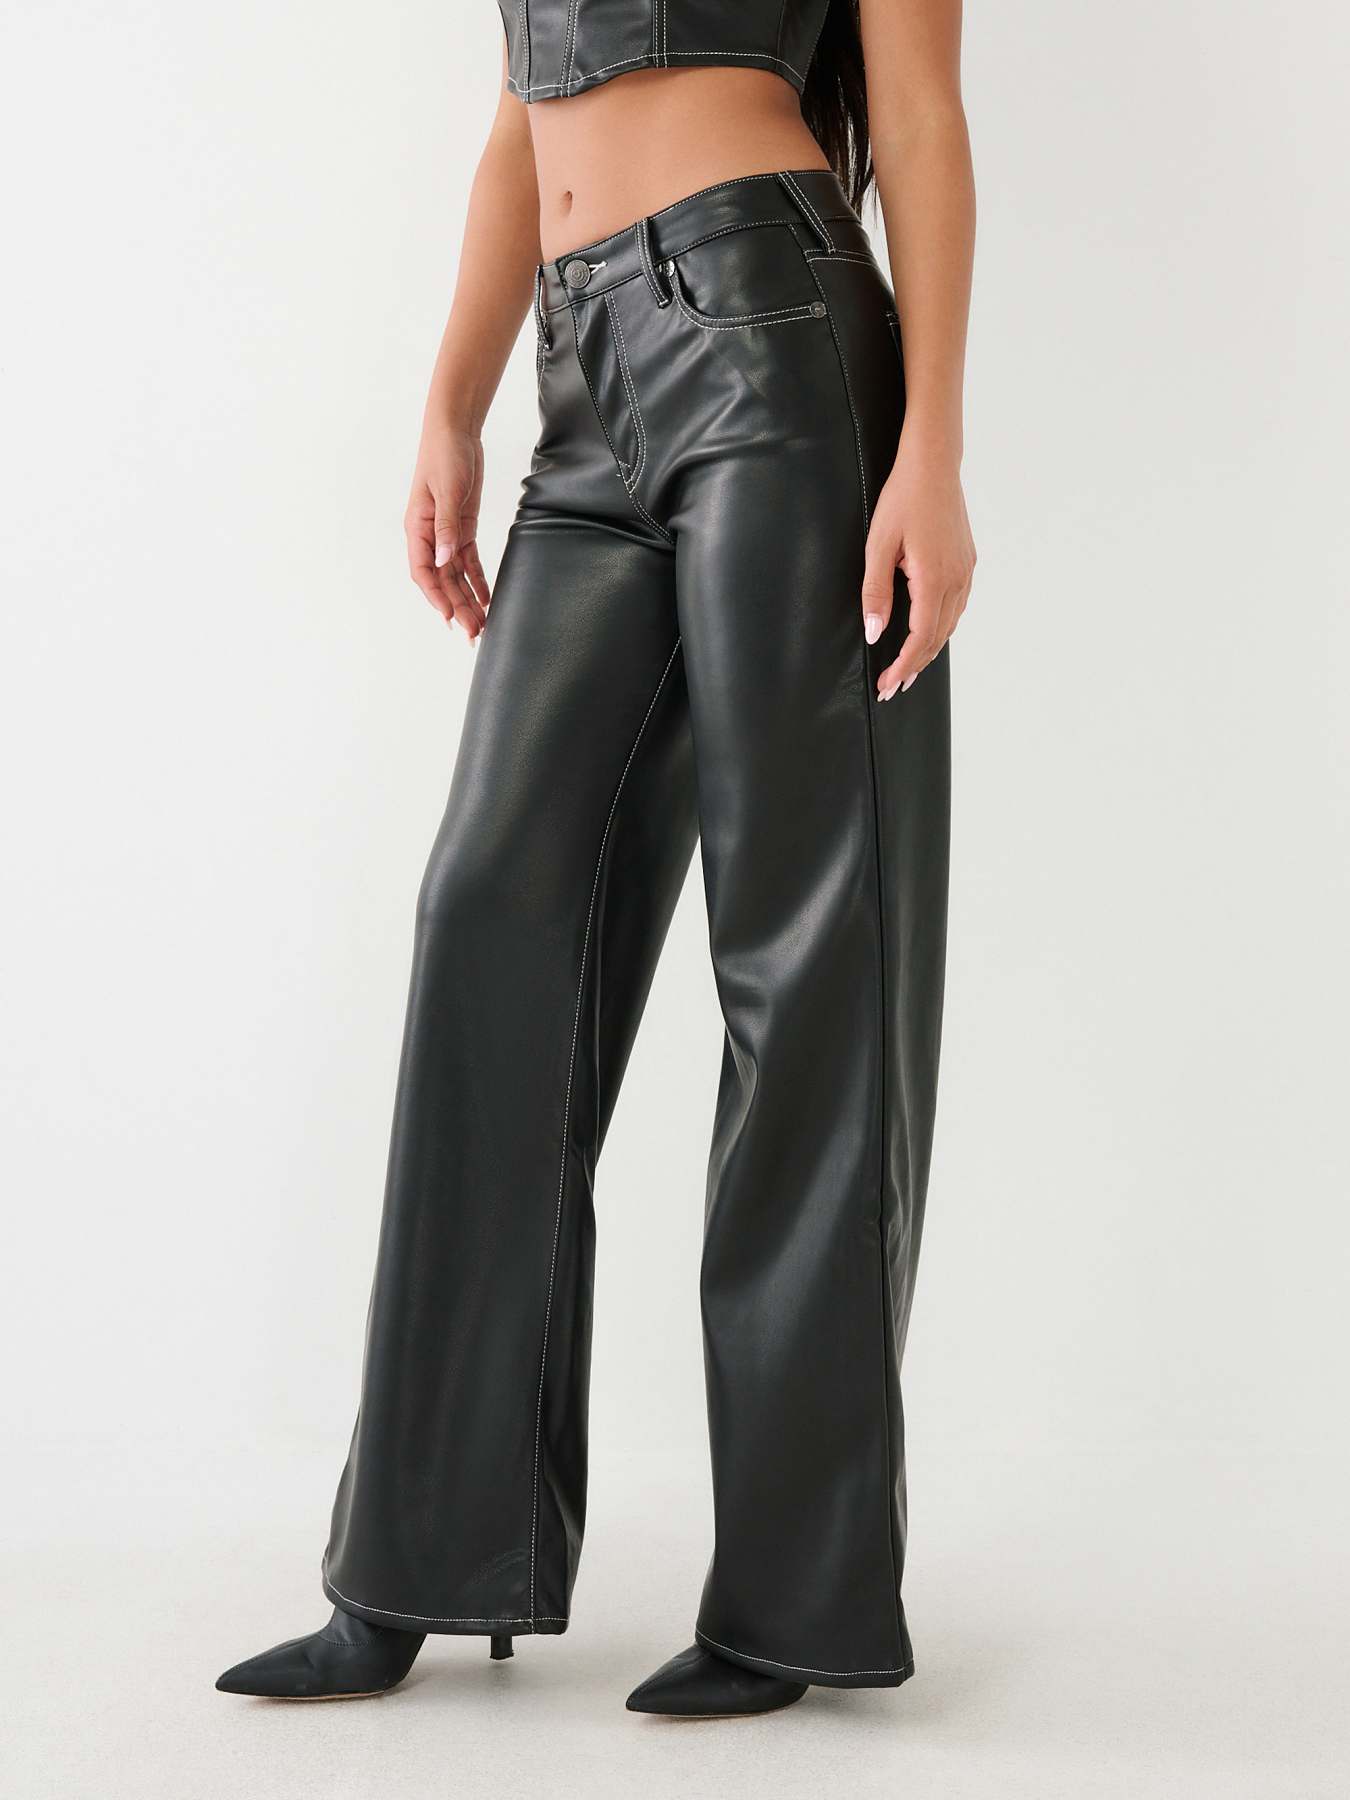 Evanthe Trousers - High Waisted Front Split Faux Leather Trousers